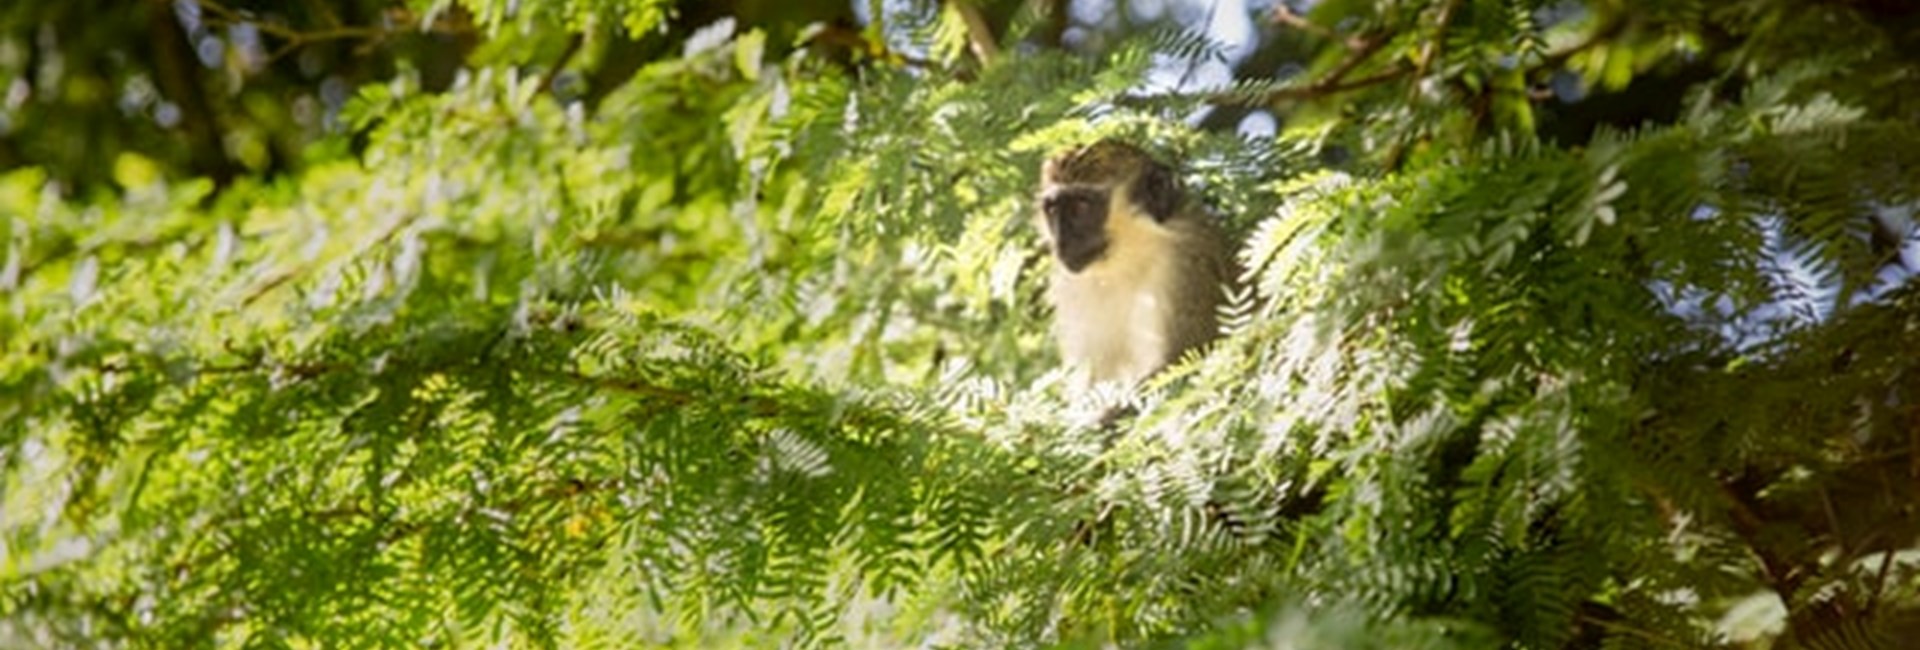 Barbados Green Monkey sitting in a tree